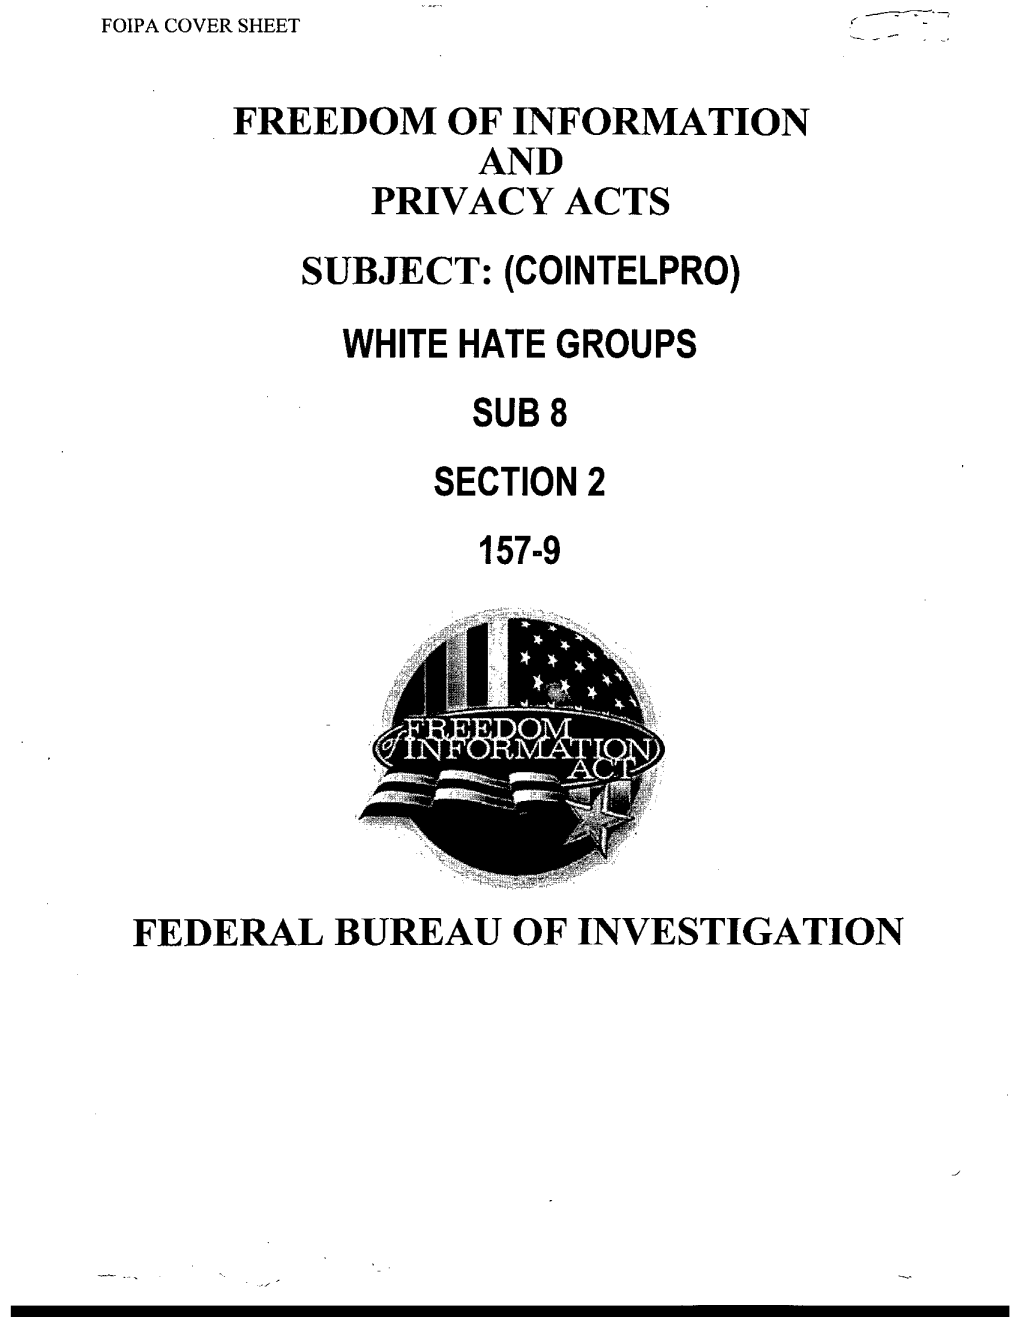 Subject: (Cointelpro) White Hate Groups Sub 8 Section 2 157-9